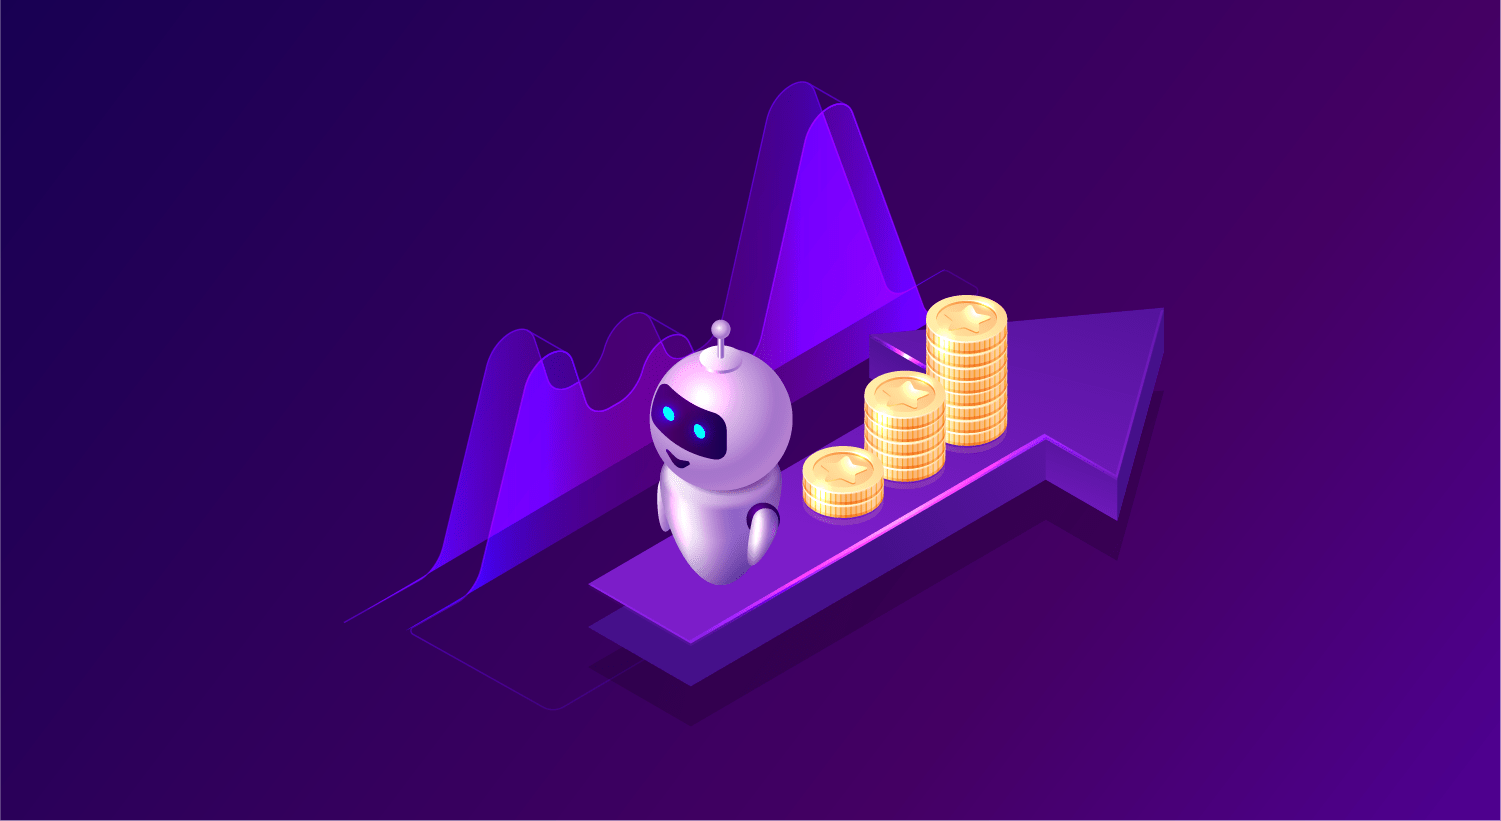 An isometric image of a robot with coins on a purple background, showcasing the fusion of AI and Chatbots through beyondchats.